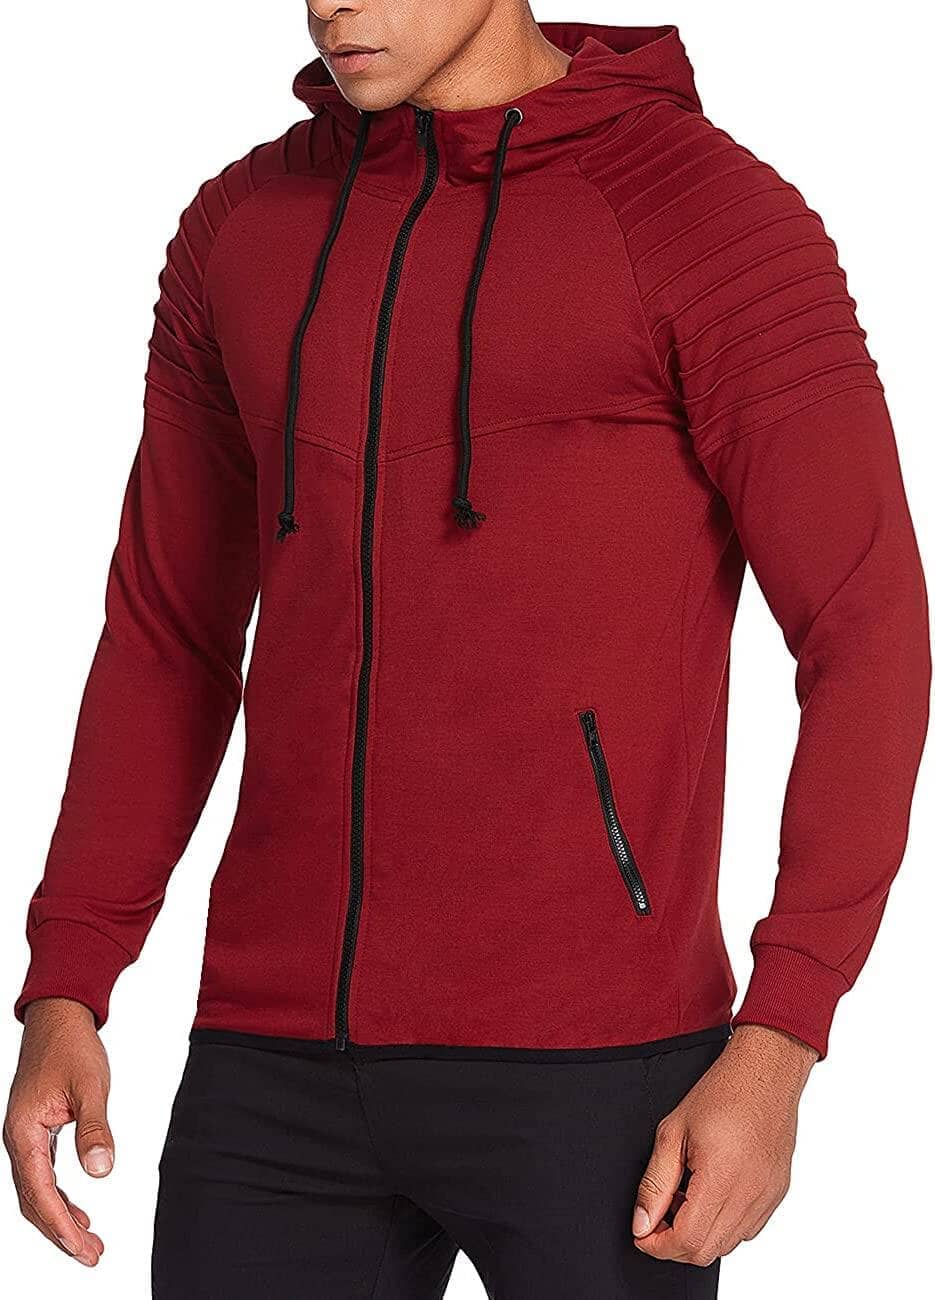 Fashion Long Sleeve Hooded With Zipper Pocket (US Only) Hoodies Coofandy's 